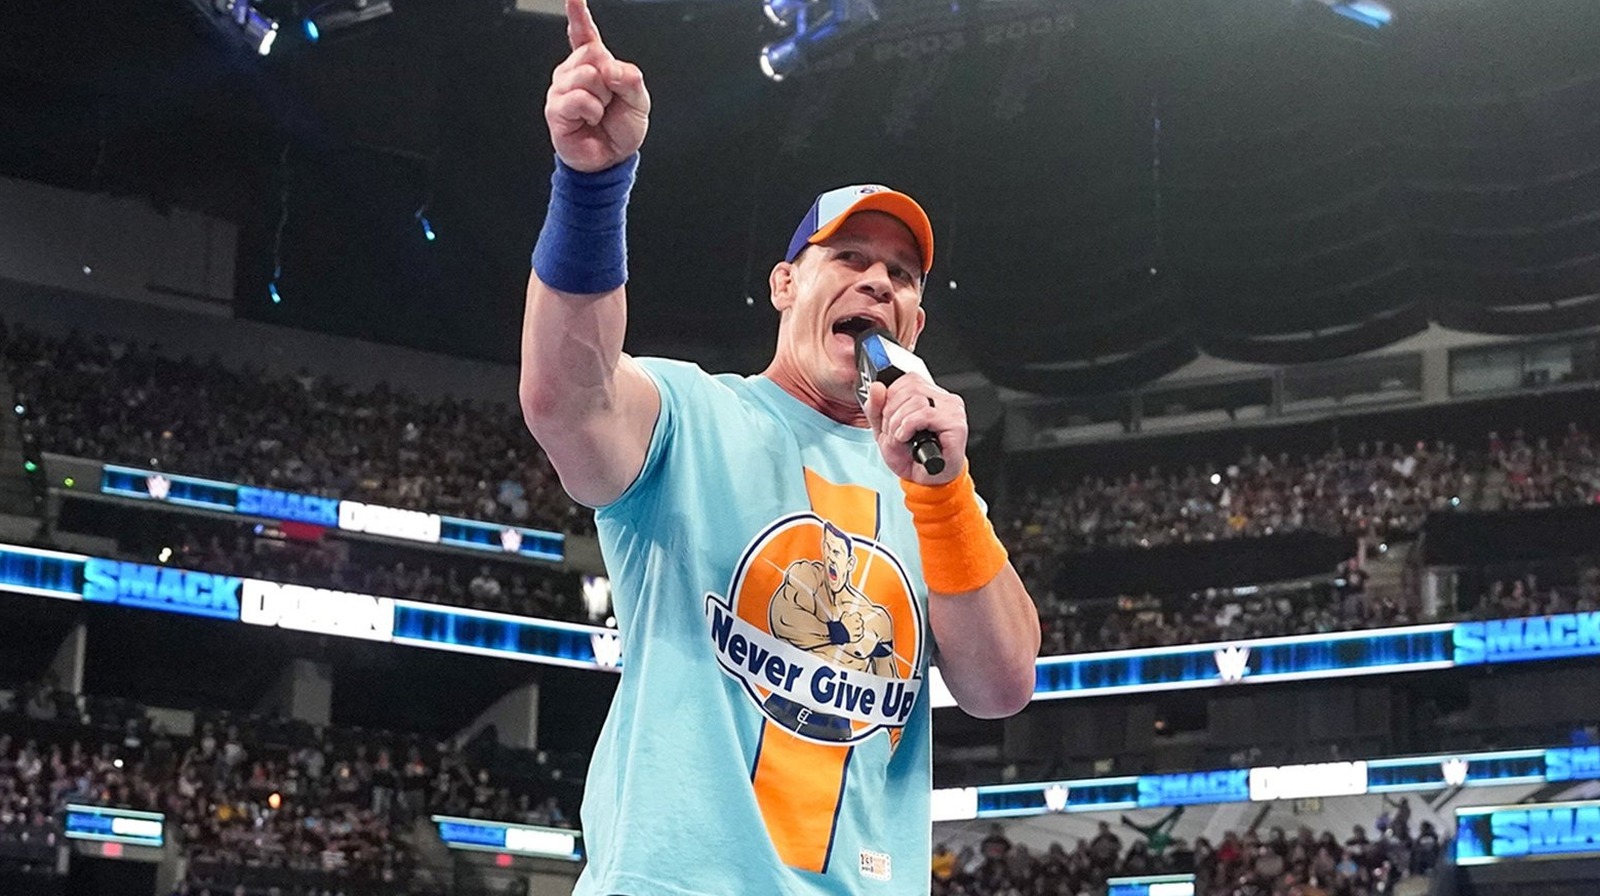 WWE Star Says John Cena's Wrestling Knowledge Is 'Leaps And Bounds' Above Others